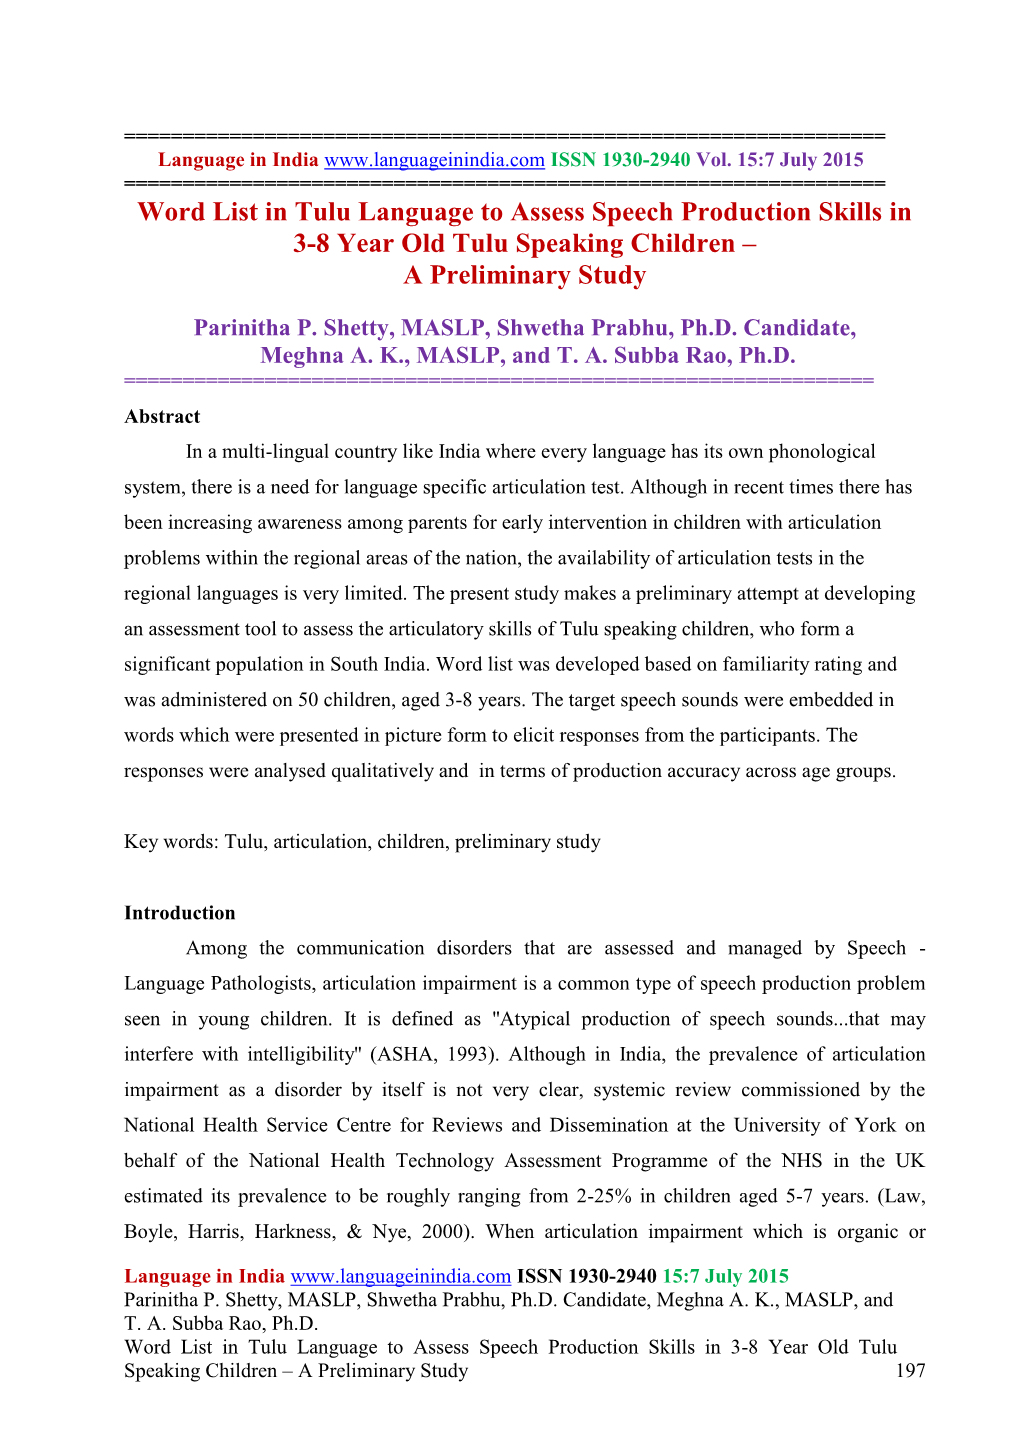 Word List in Tulu Language to Assess Speech Production Skills in 3-8 Year Old Tulu Speaking Children – a Preliminary Study